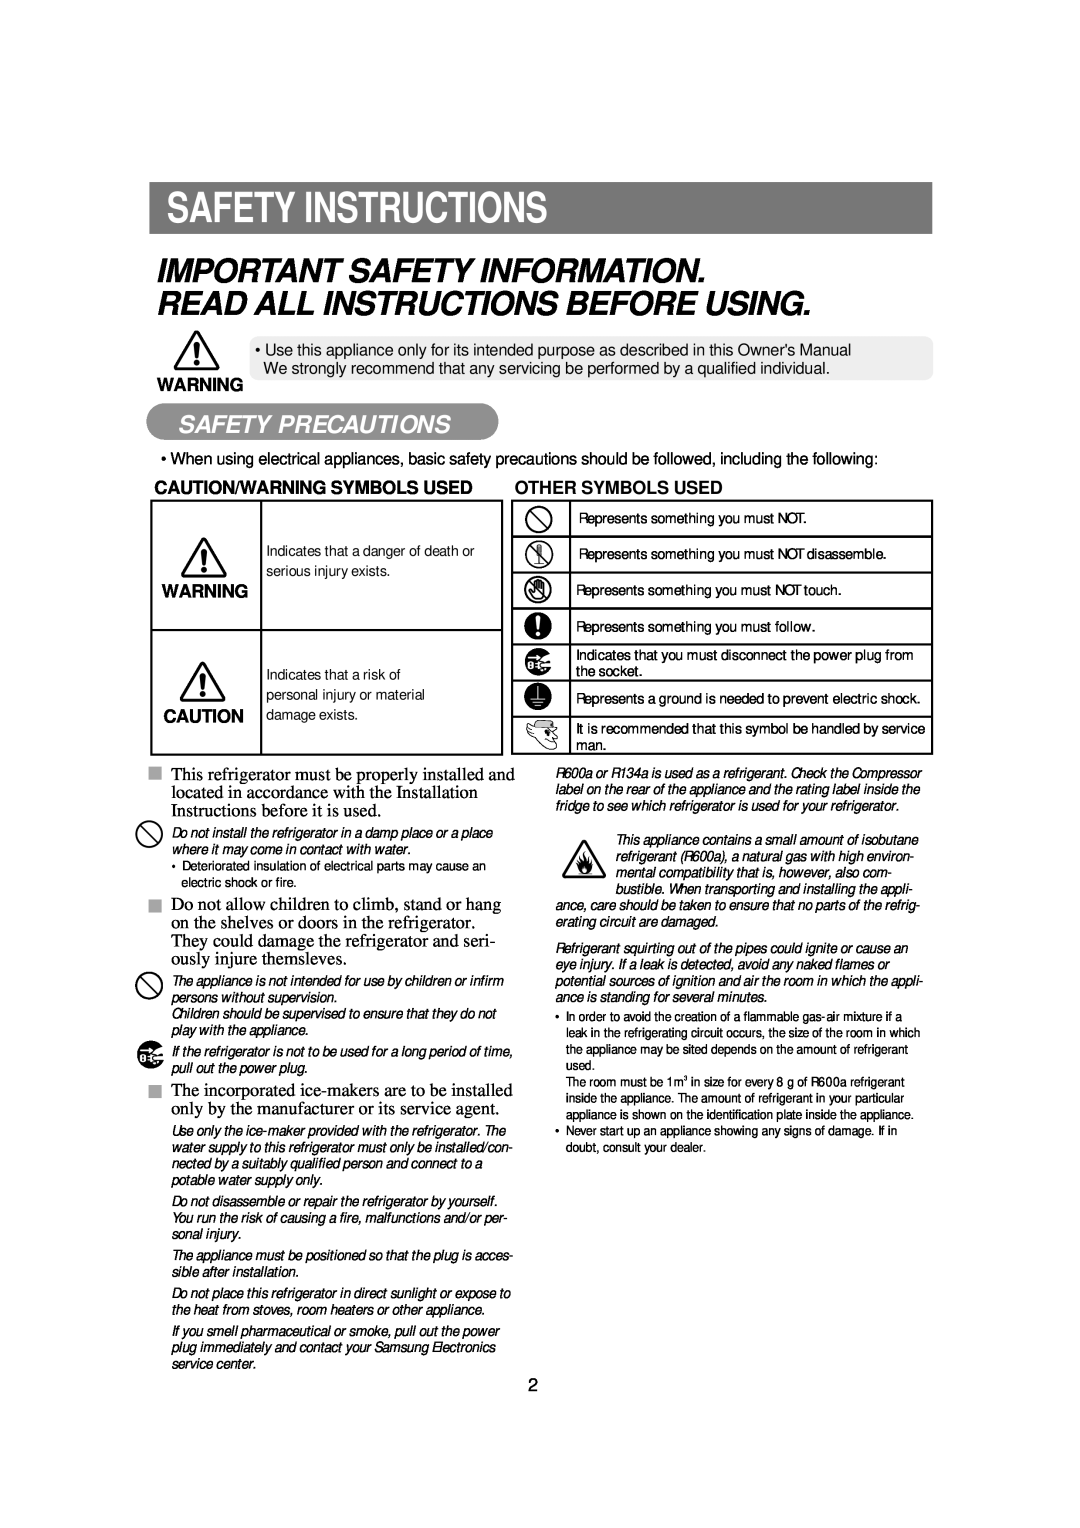 Samsung RSE8N, RSE8F, RSE8B manual Safety Instructions, Safety Precautions, Caution/Warning Symbols Used, Other Symbols Used 